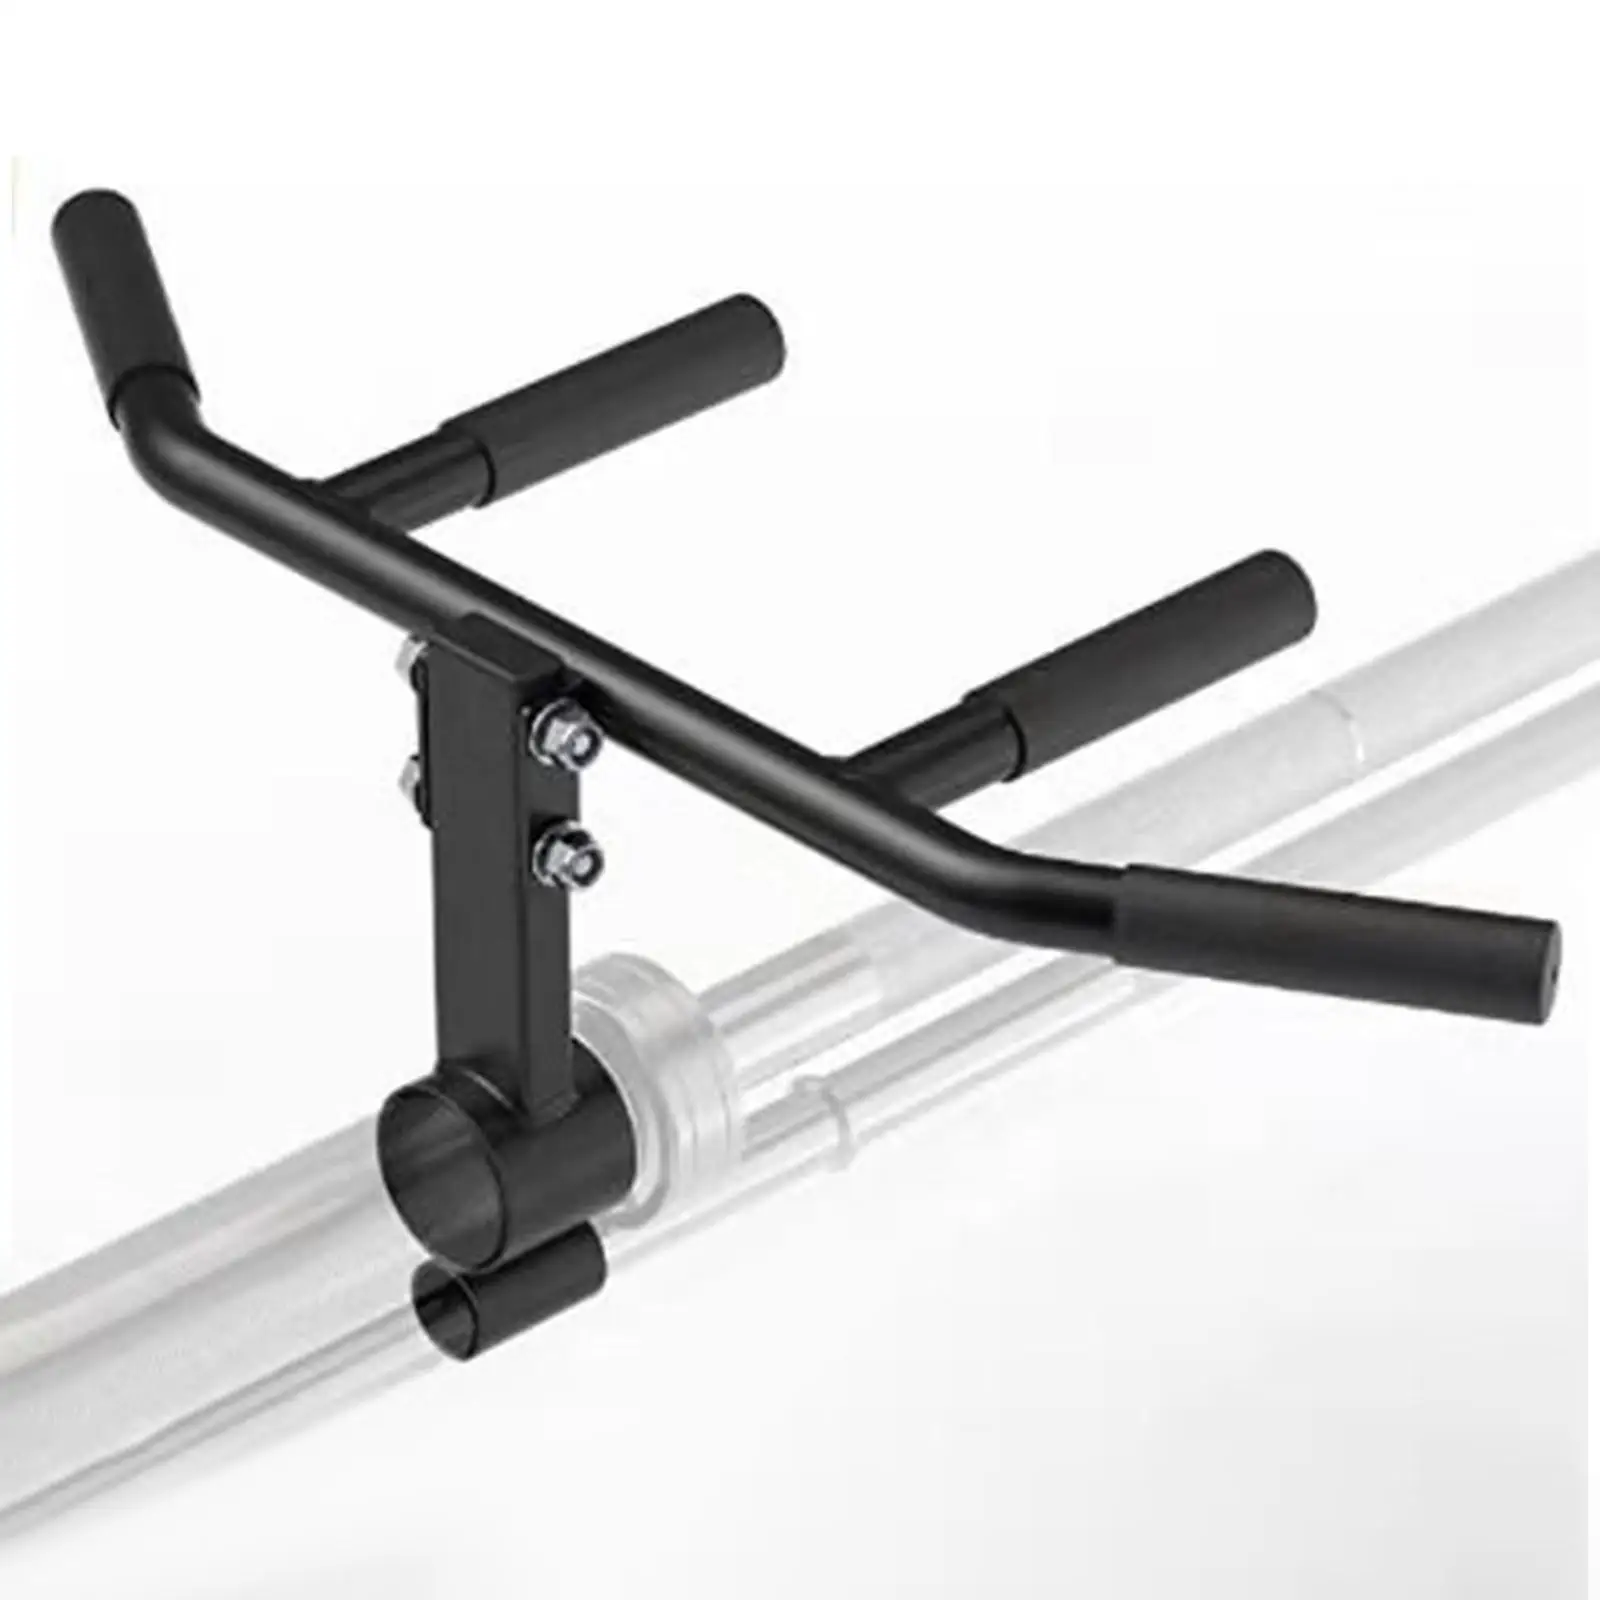 Bar Row Barbell Attachment Easy to Install for Strength Training